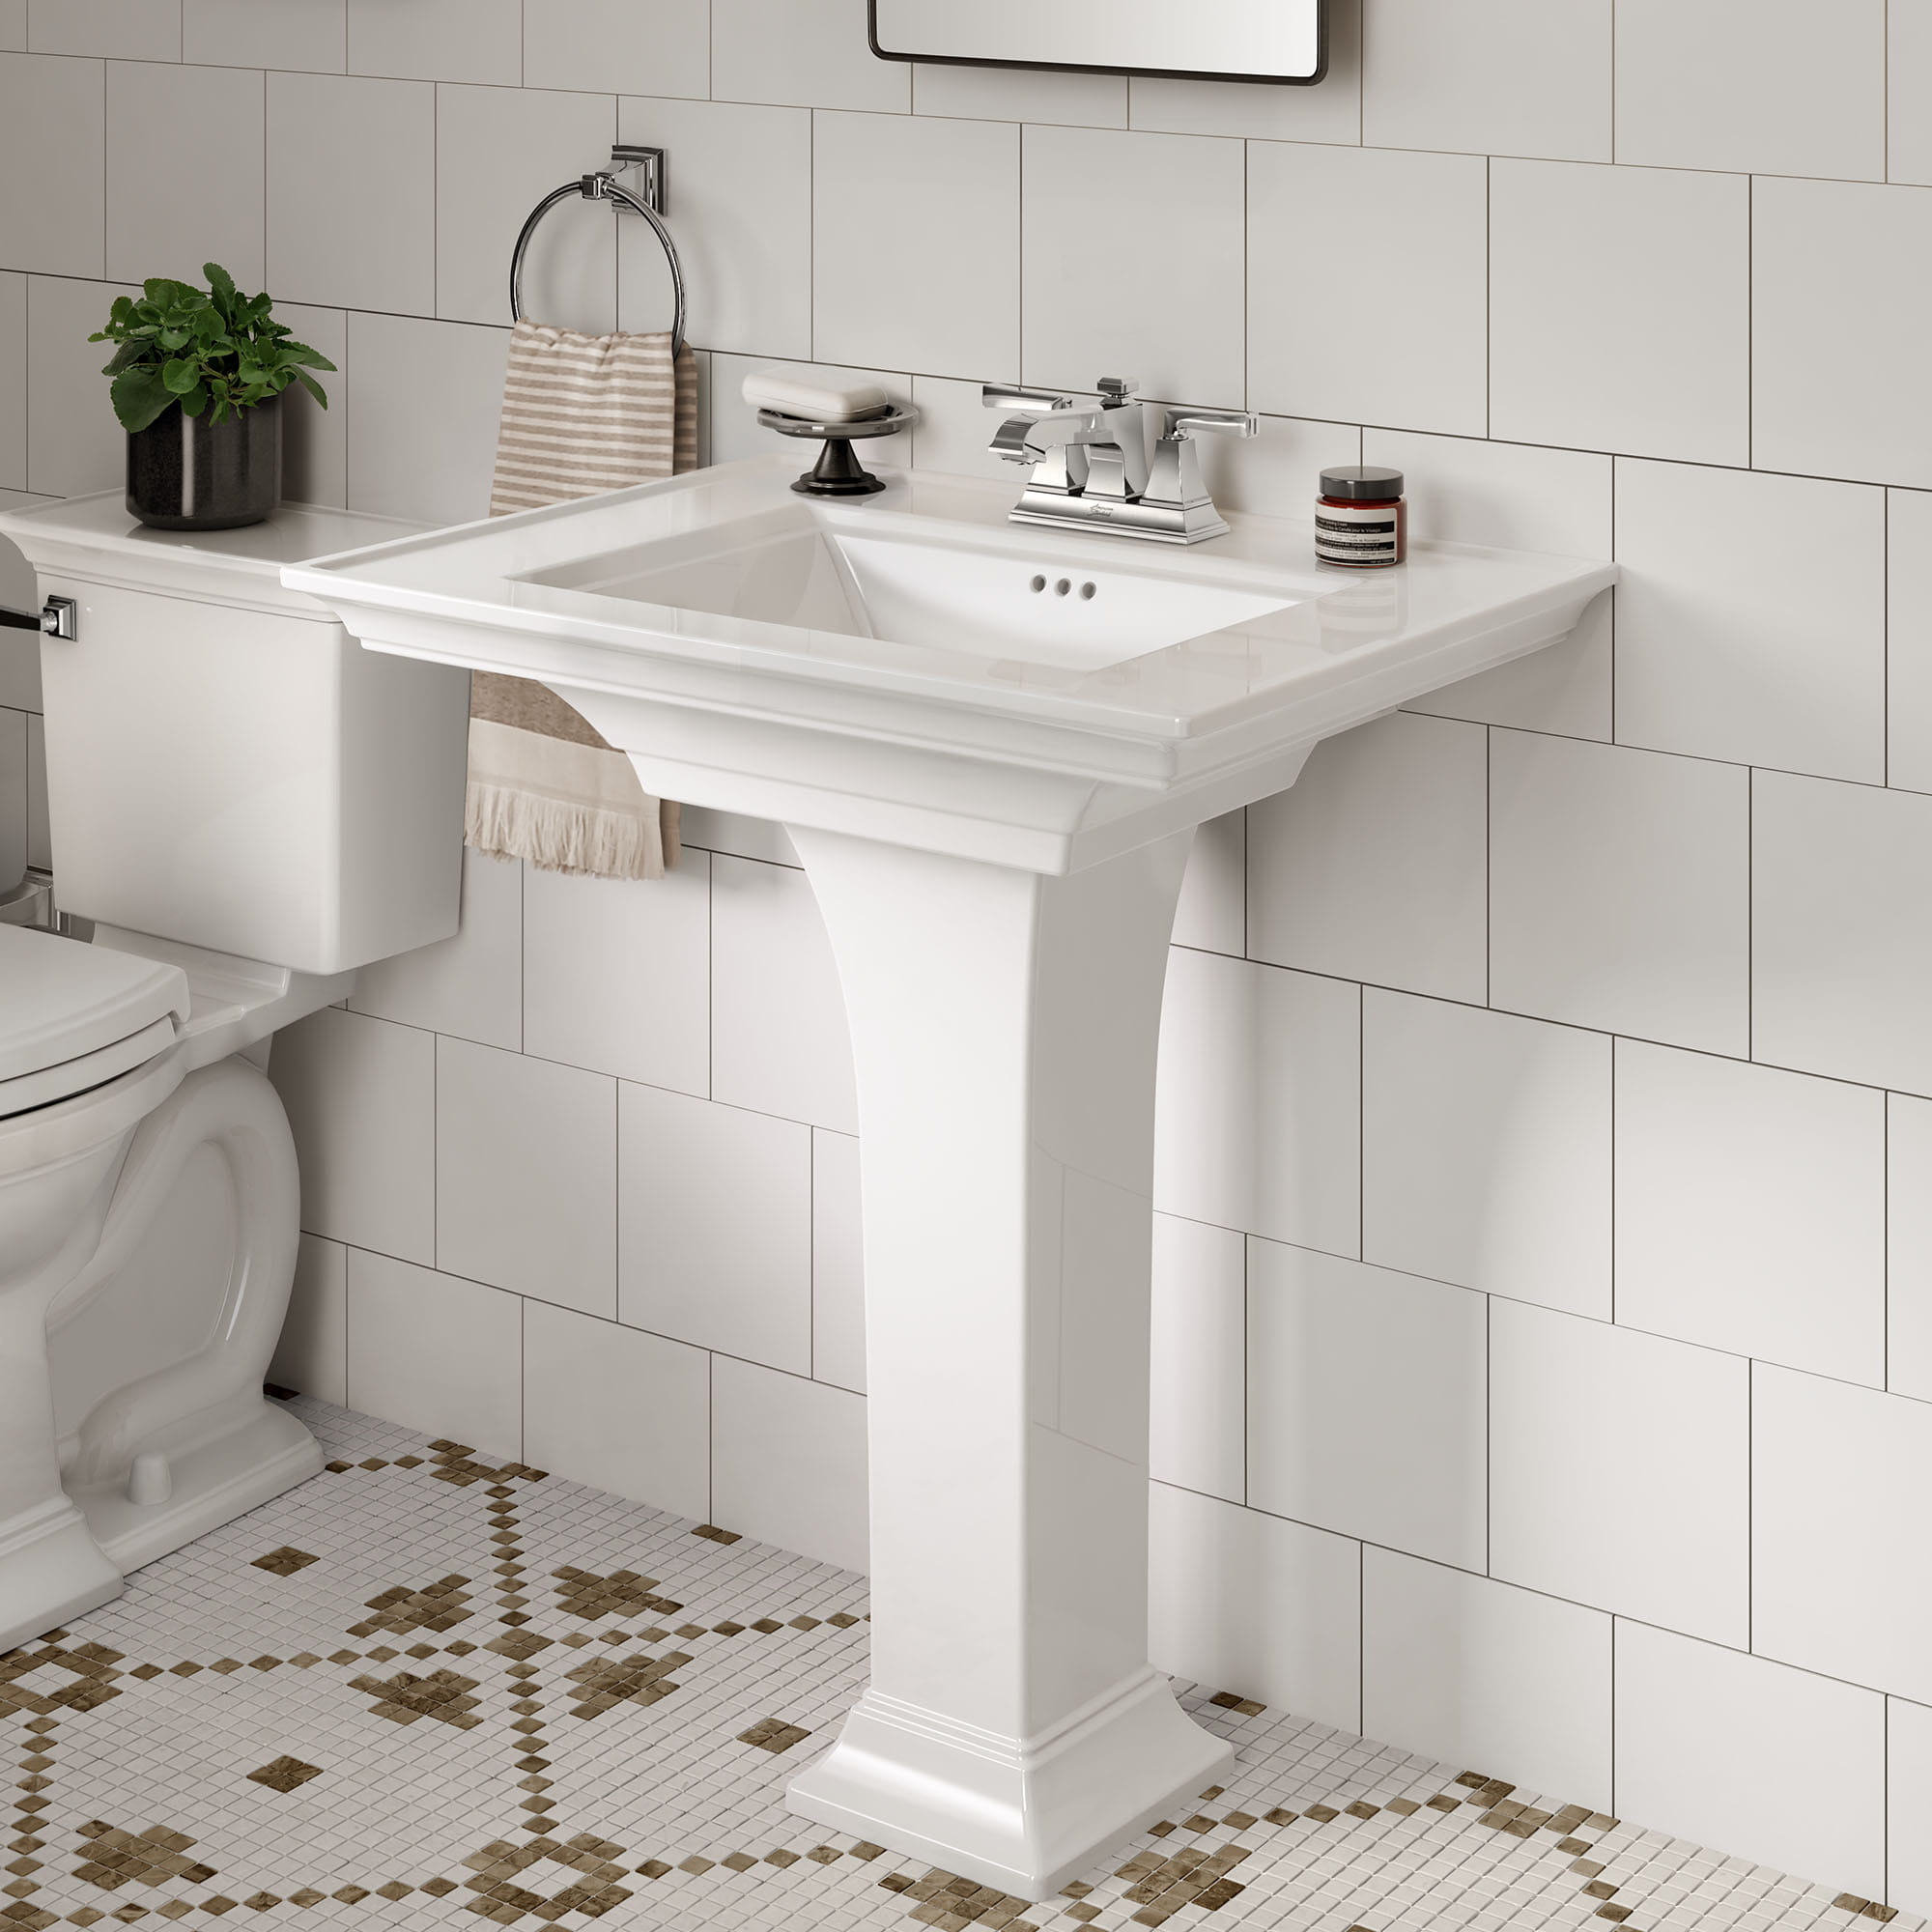 Town Square S 4 Inch Centerset Pedestal Sink Top WHITE